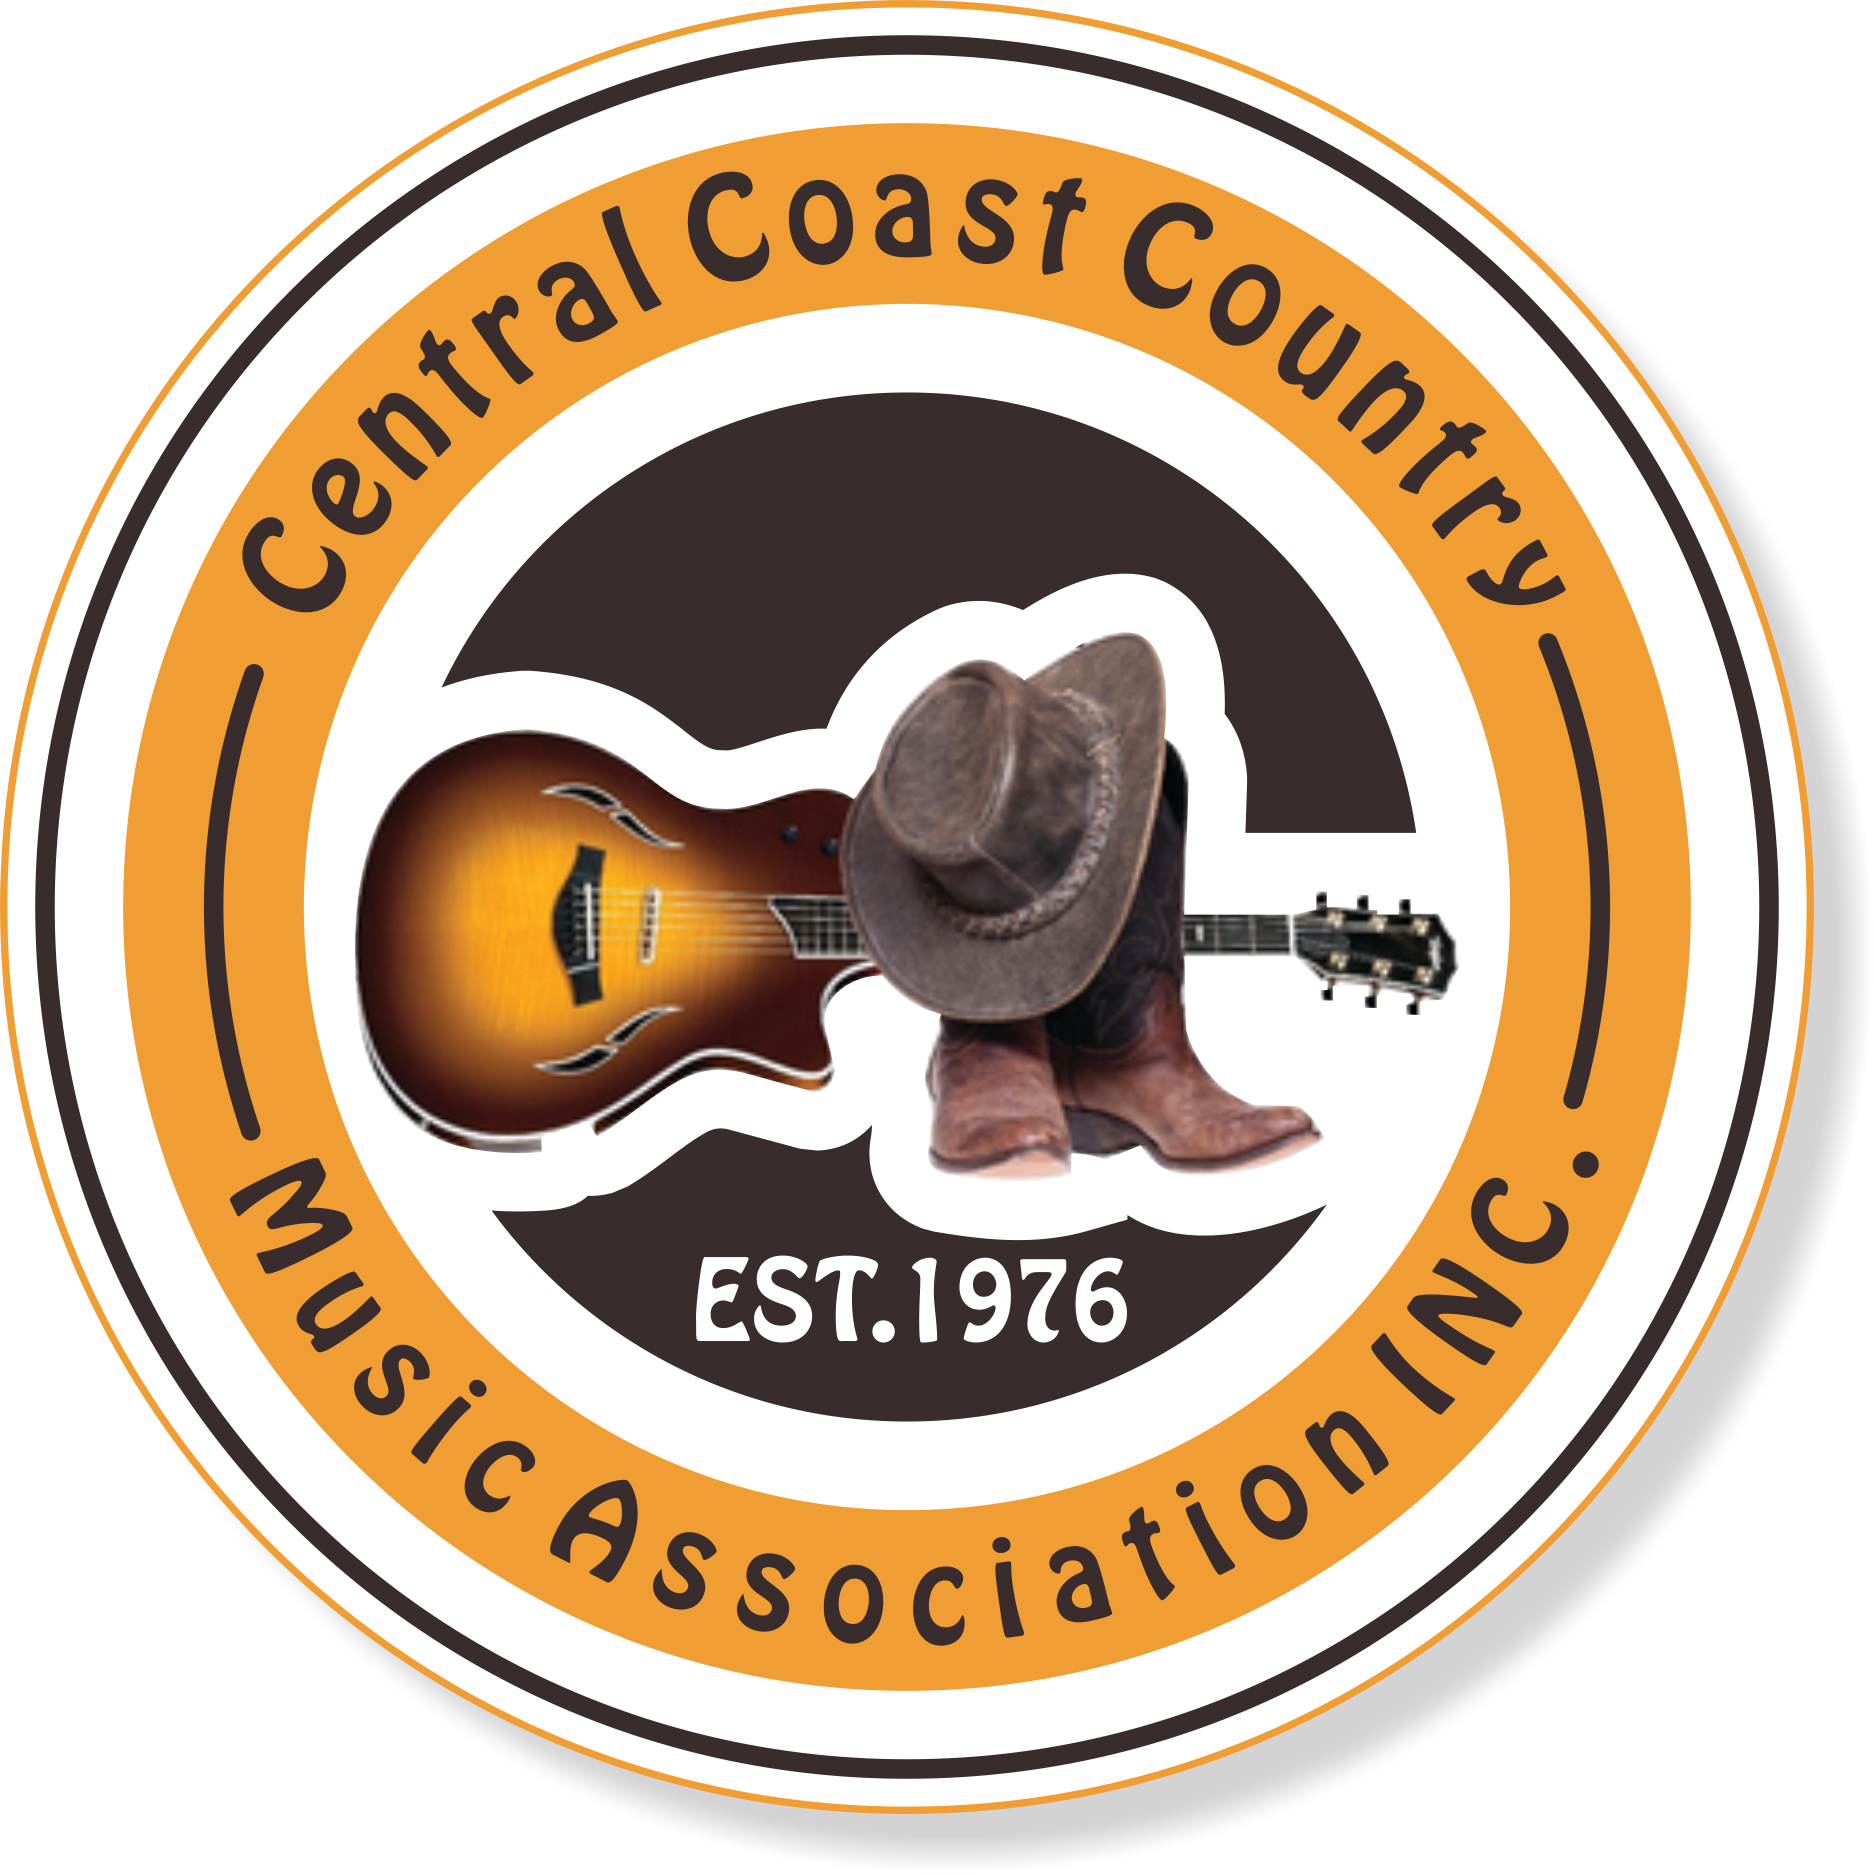 Central Coast Country Music Association Inc